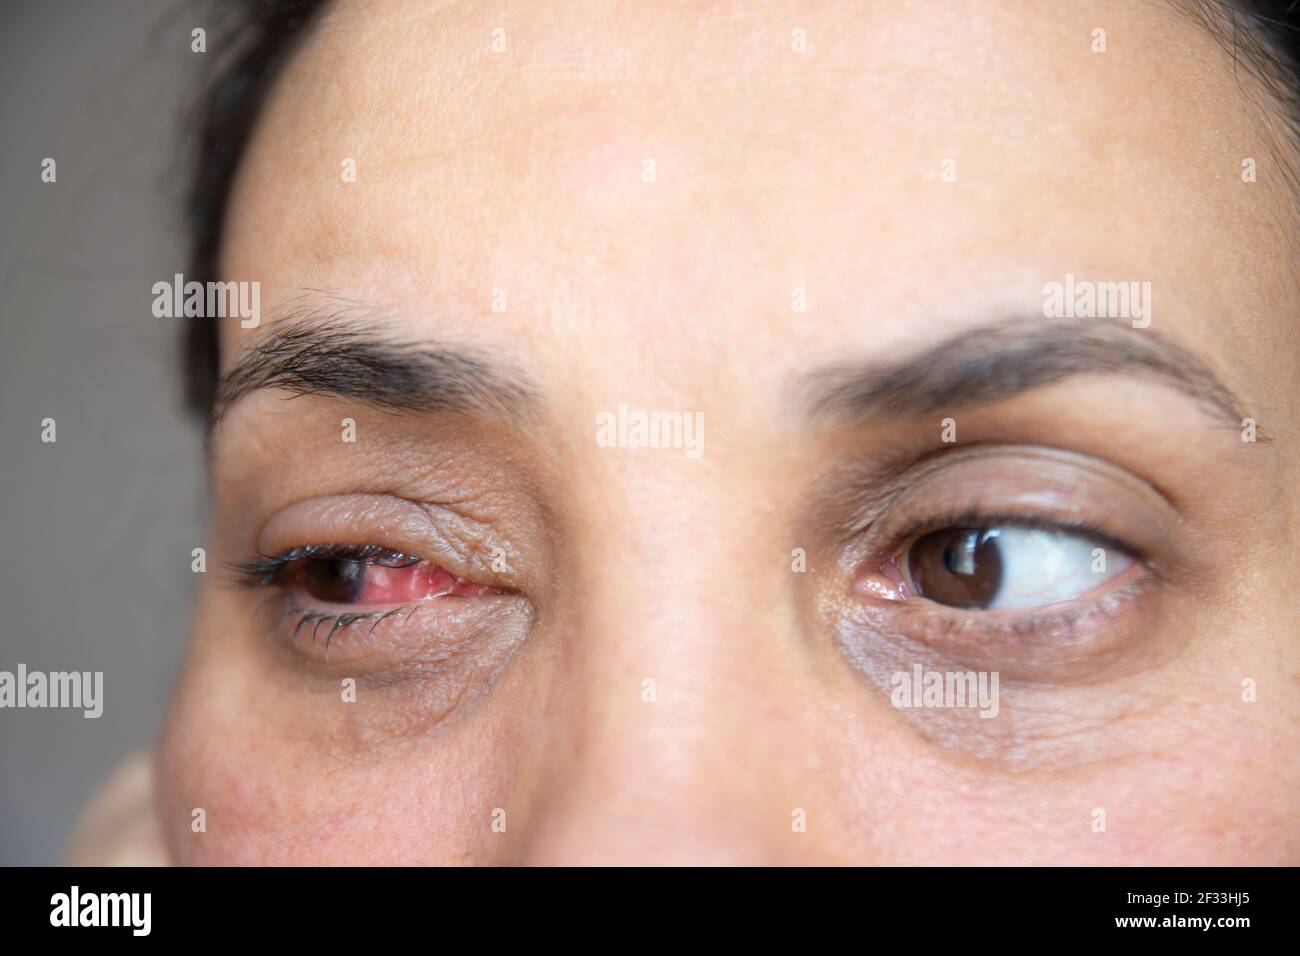 the recovery process of the young woman after eye surgery. Portrait. Close up. Stock Photo